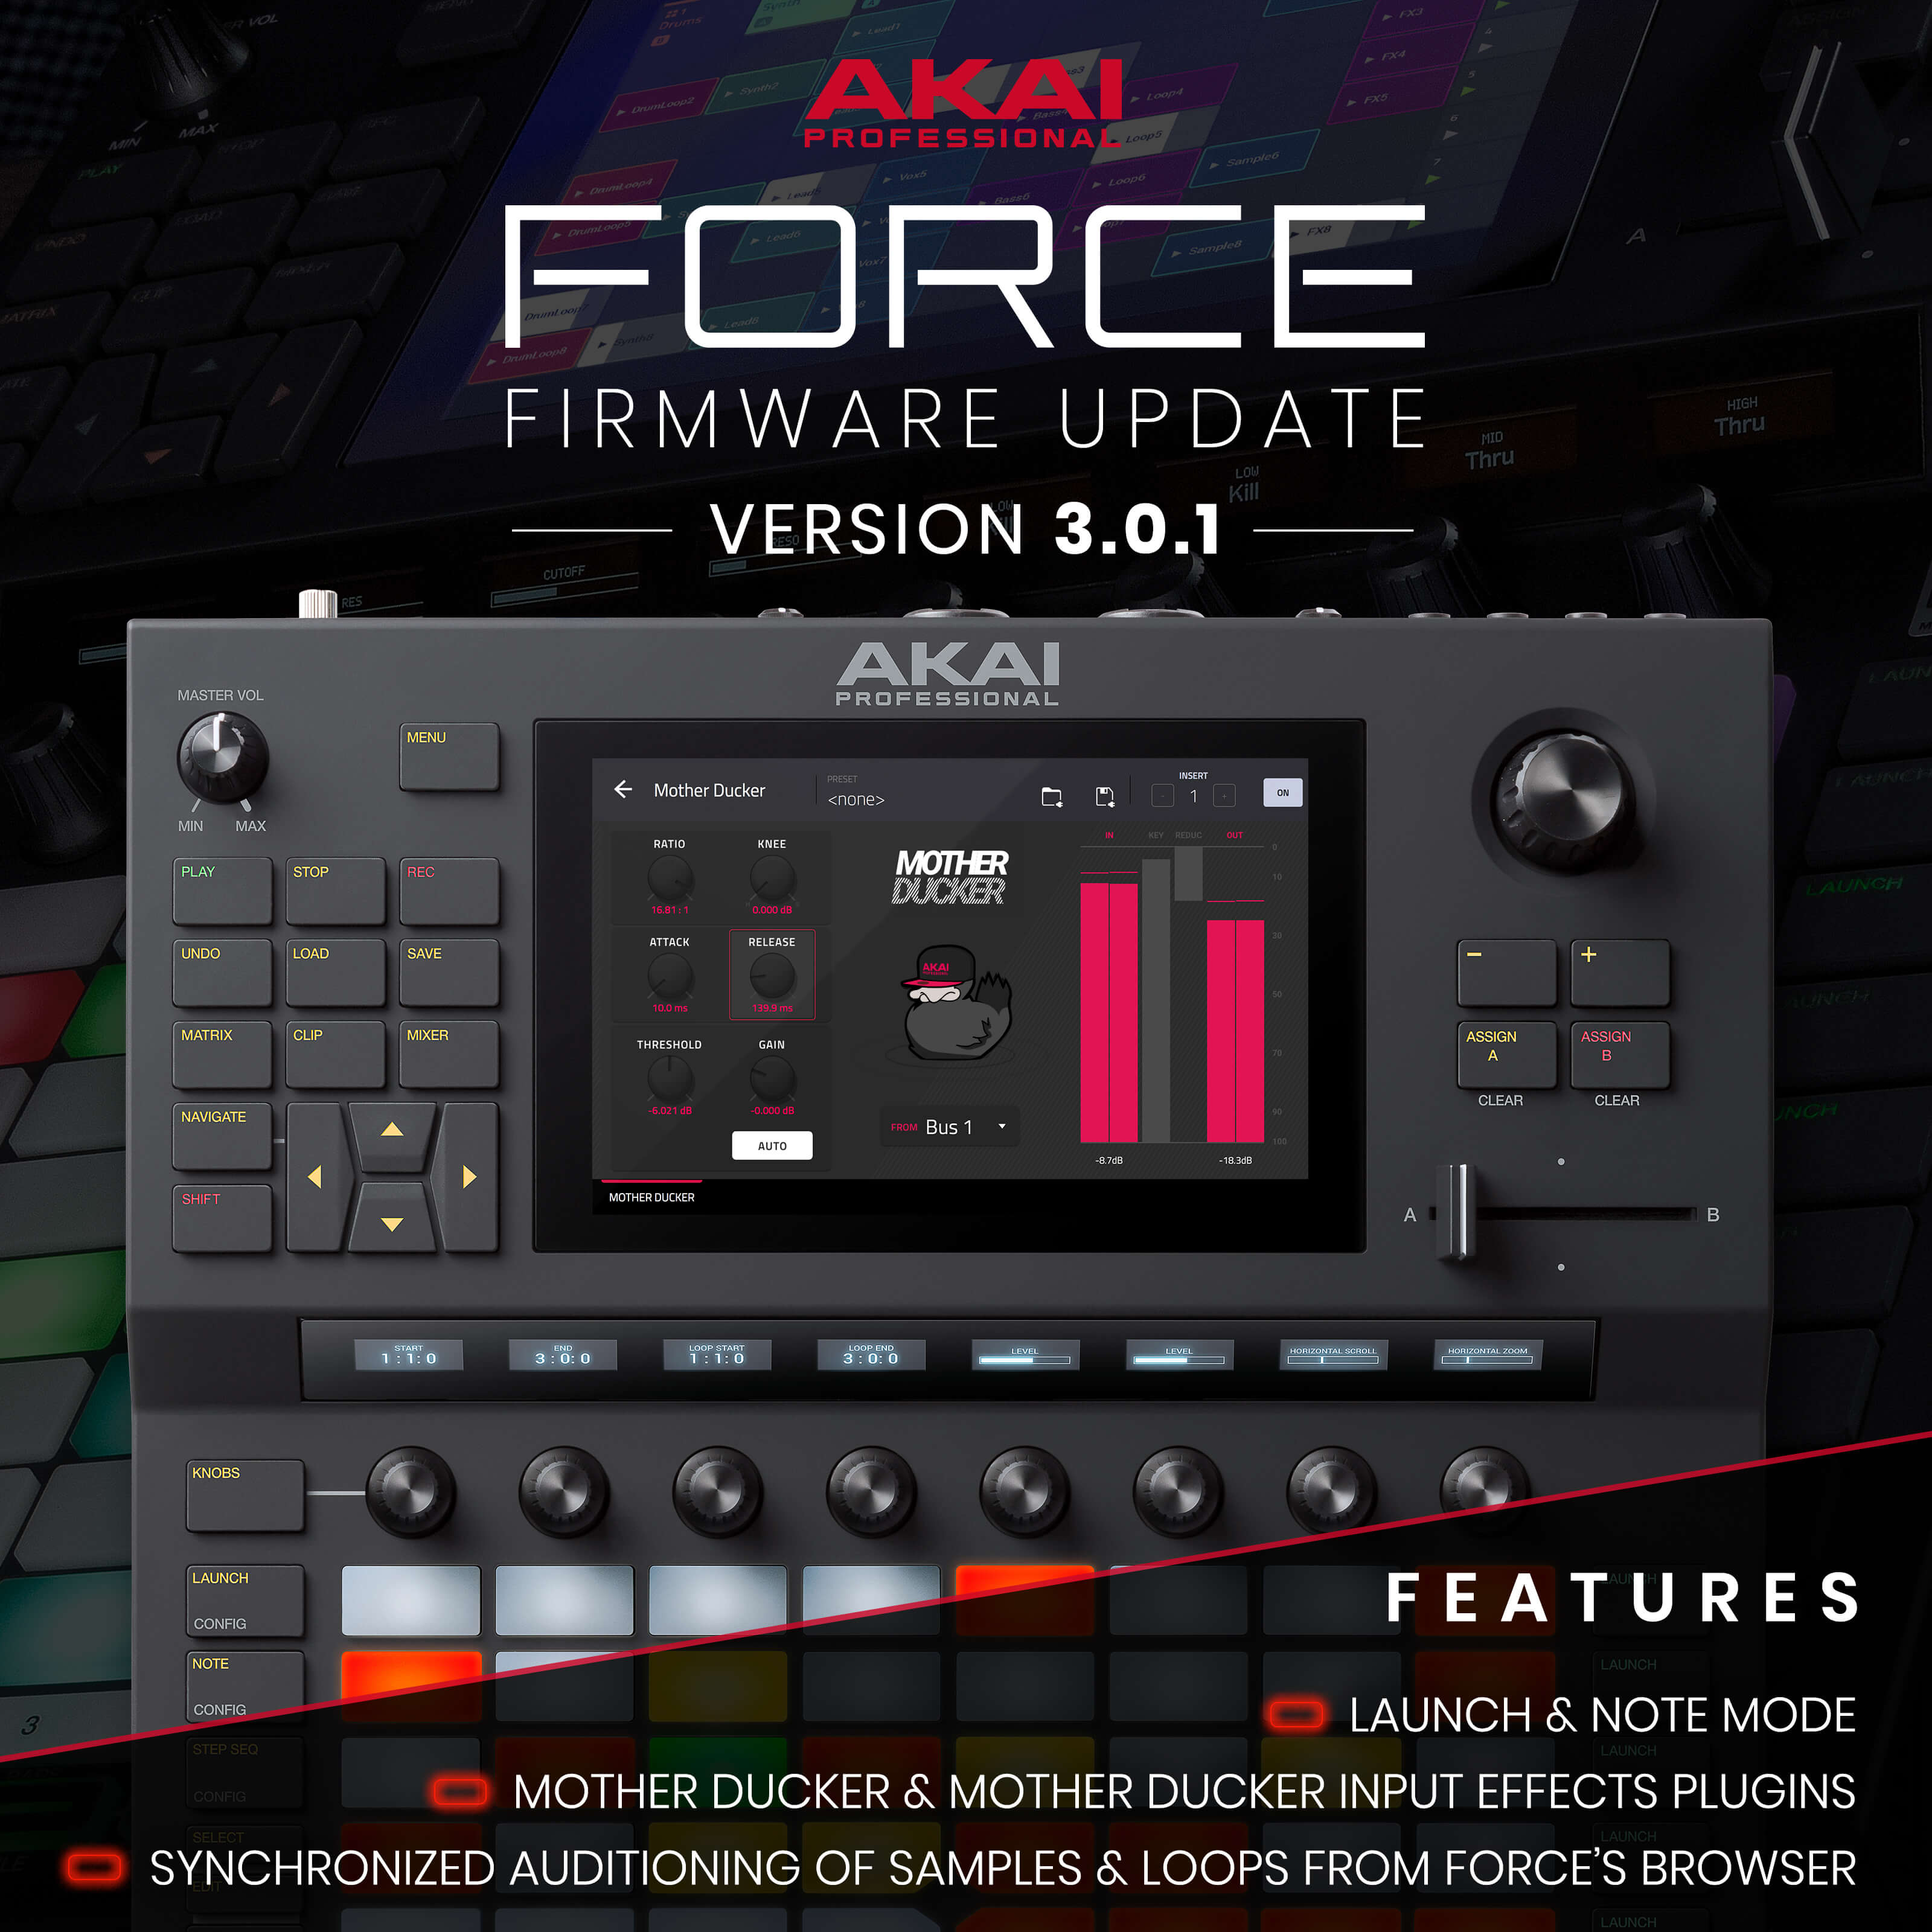 Akai Professional announces 3.0.1 firmware update for Force